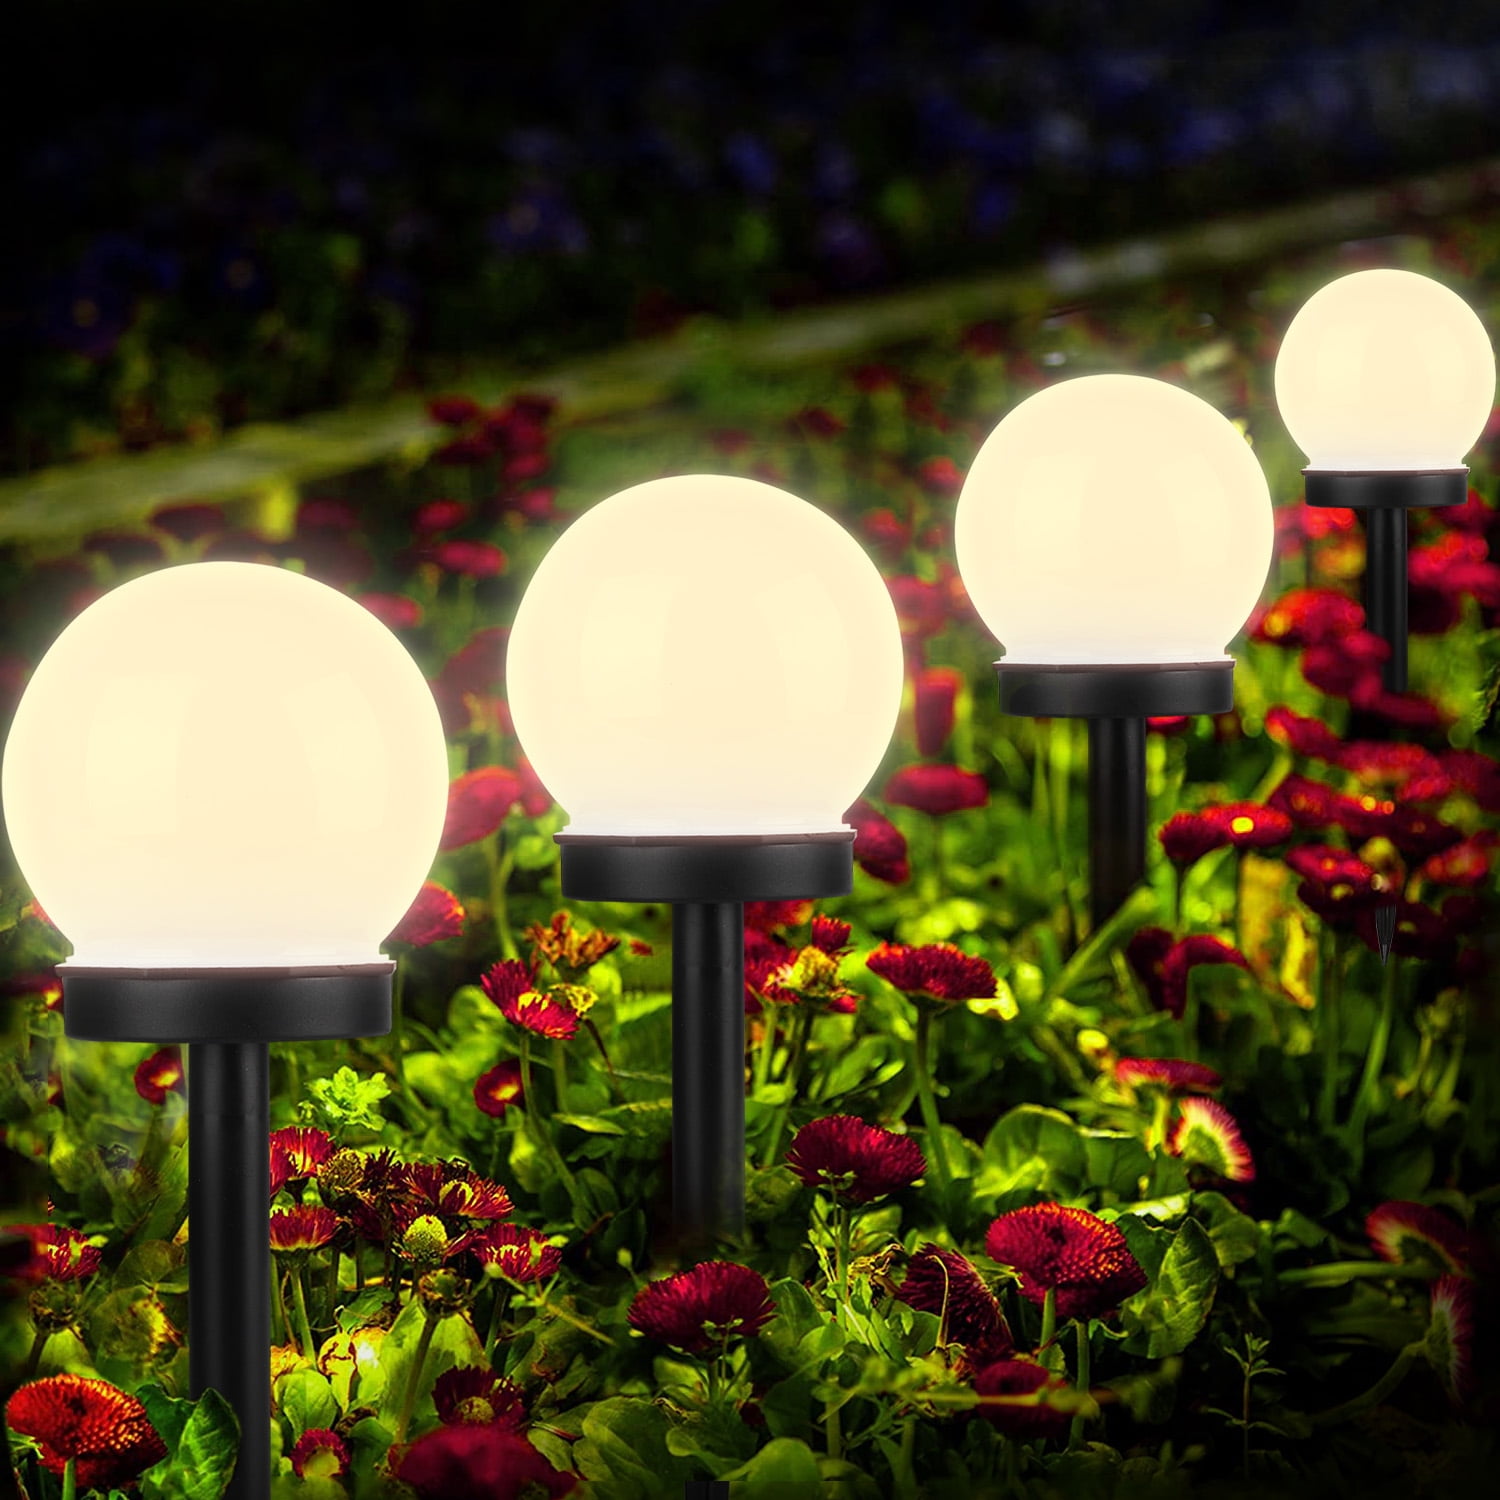 Details about   Flowerbed Solar Ground Ball Lights LED Path Patio Garden Decking Lamp Waterproof 